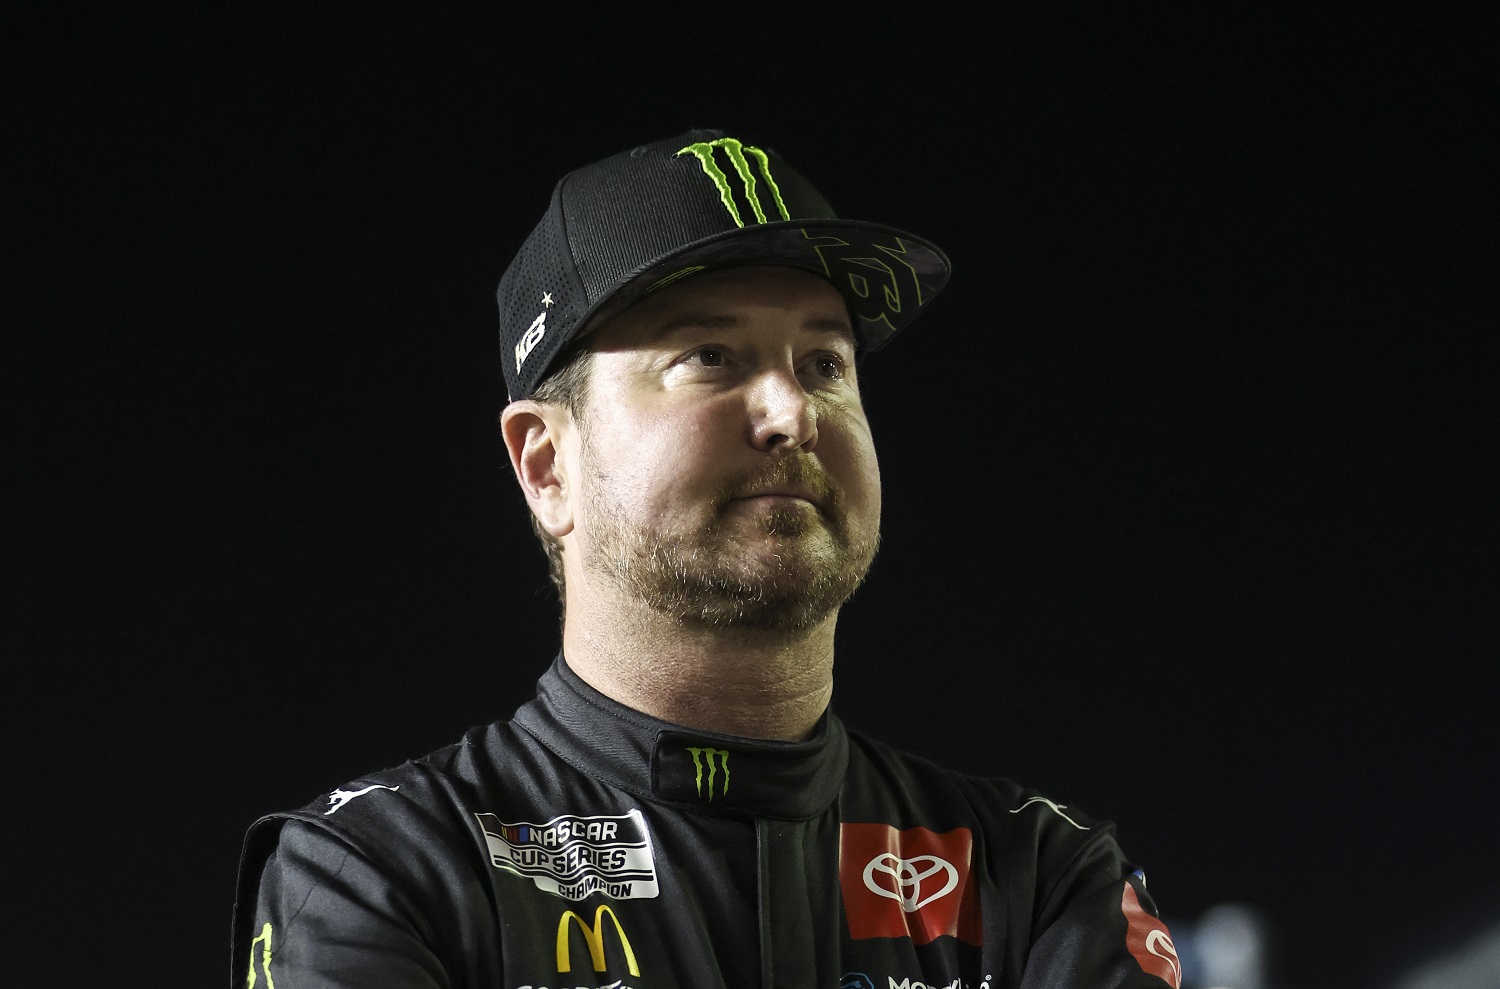 Kurt Busch, driver of the No. 45 Toyota, waits on pit lane during qualifying for the NASCAR Cup Series Daytona 500 on Feb. 16, 2022. | James Gilbert/Getty Images